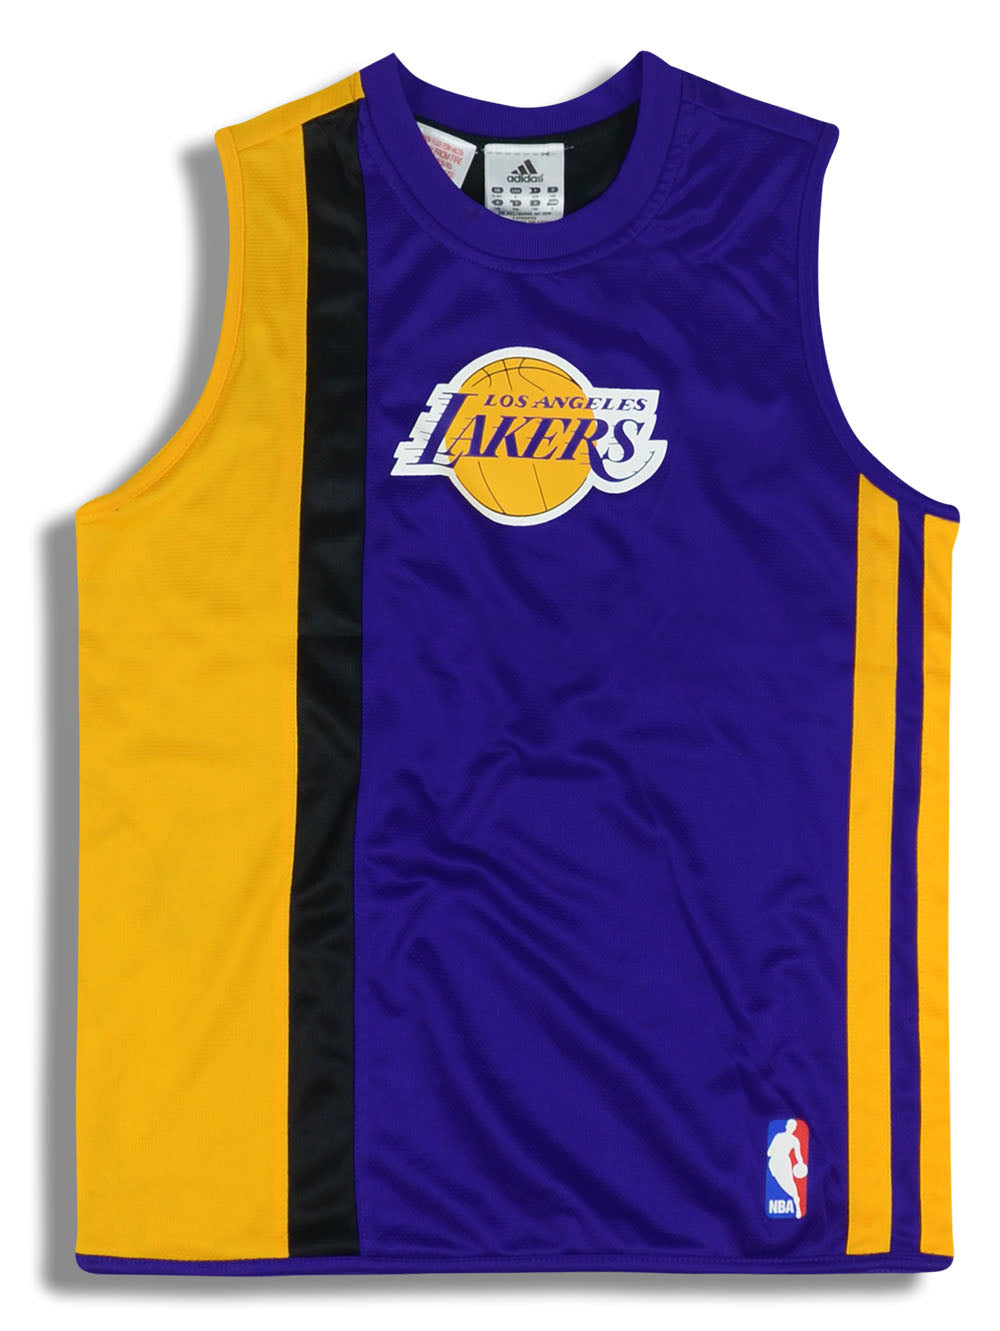 2000's LA LAKERS ADIDAS REVERSIBLE TRAINING JERSEY Y - Classic